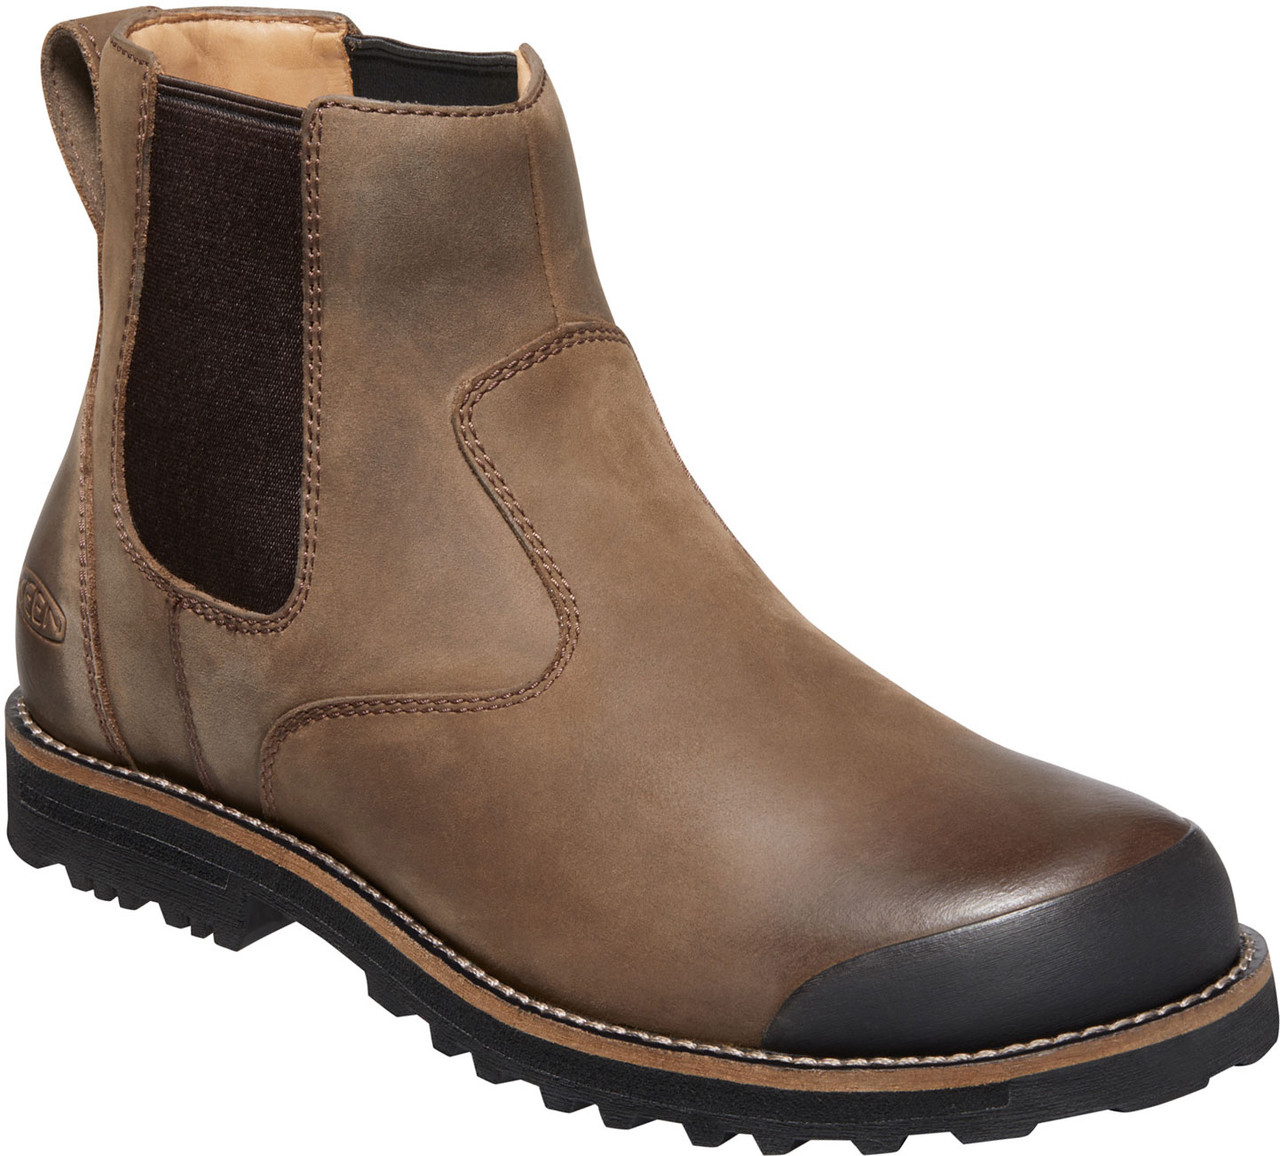 KEEN Mens The 59 Fashion Boot